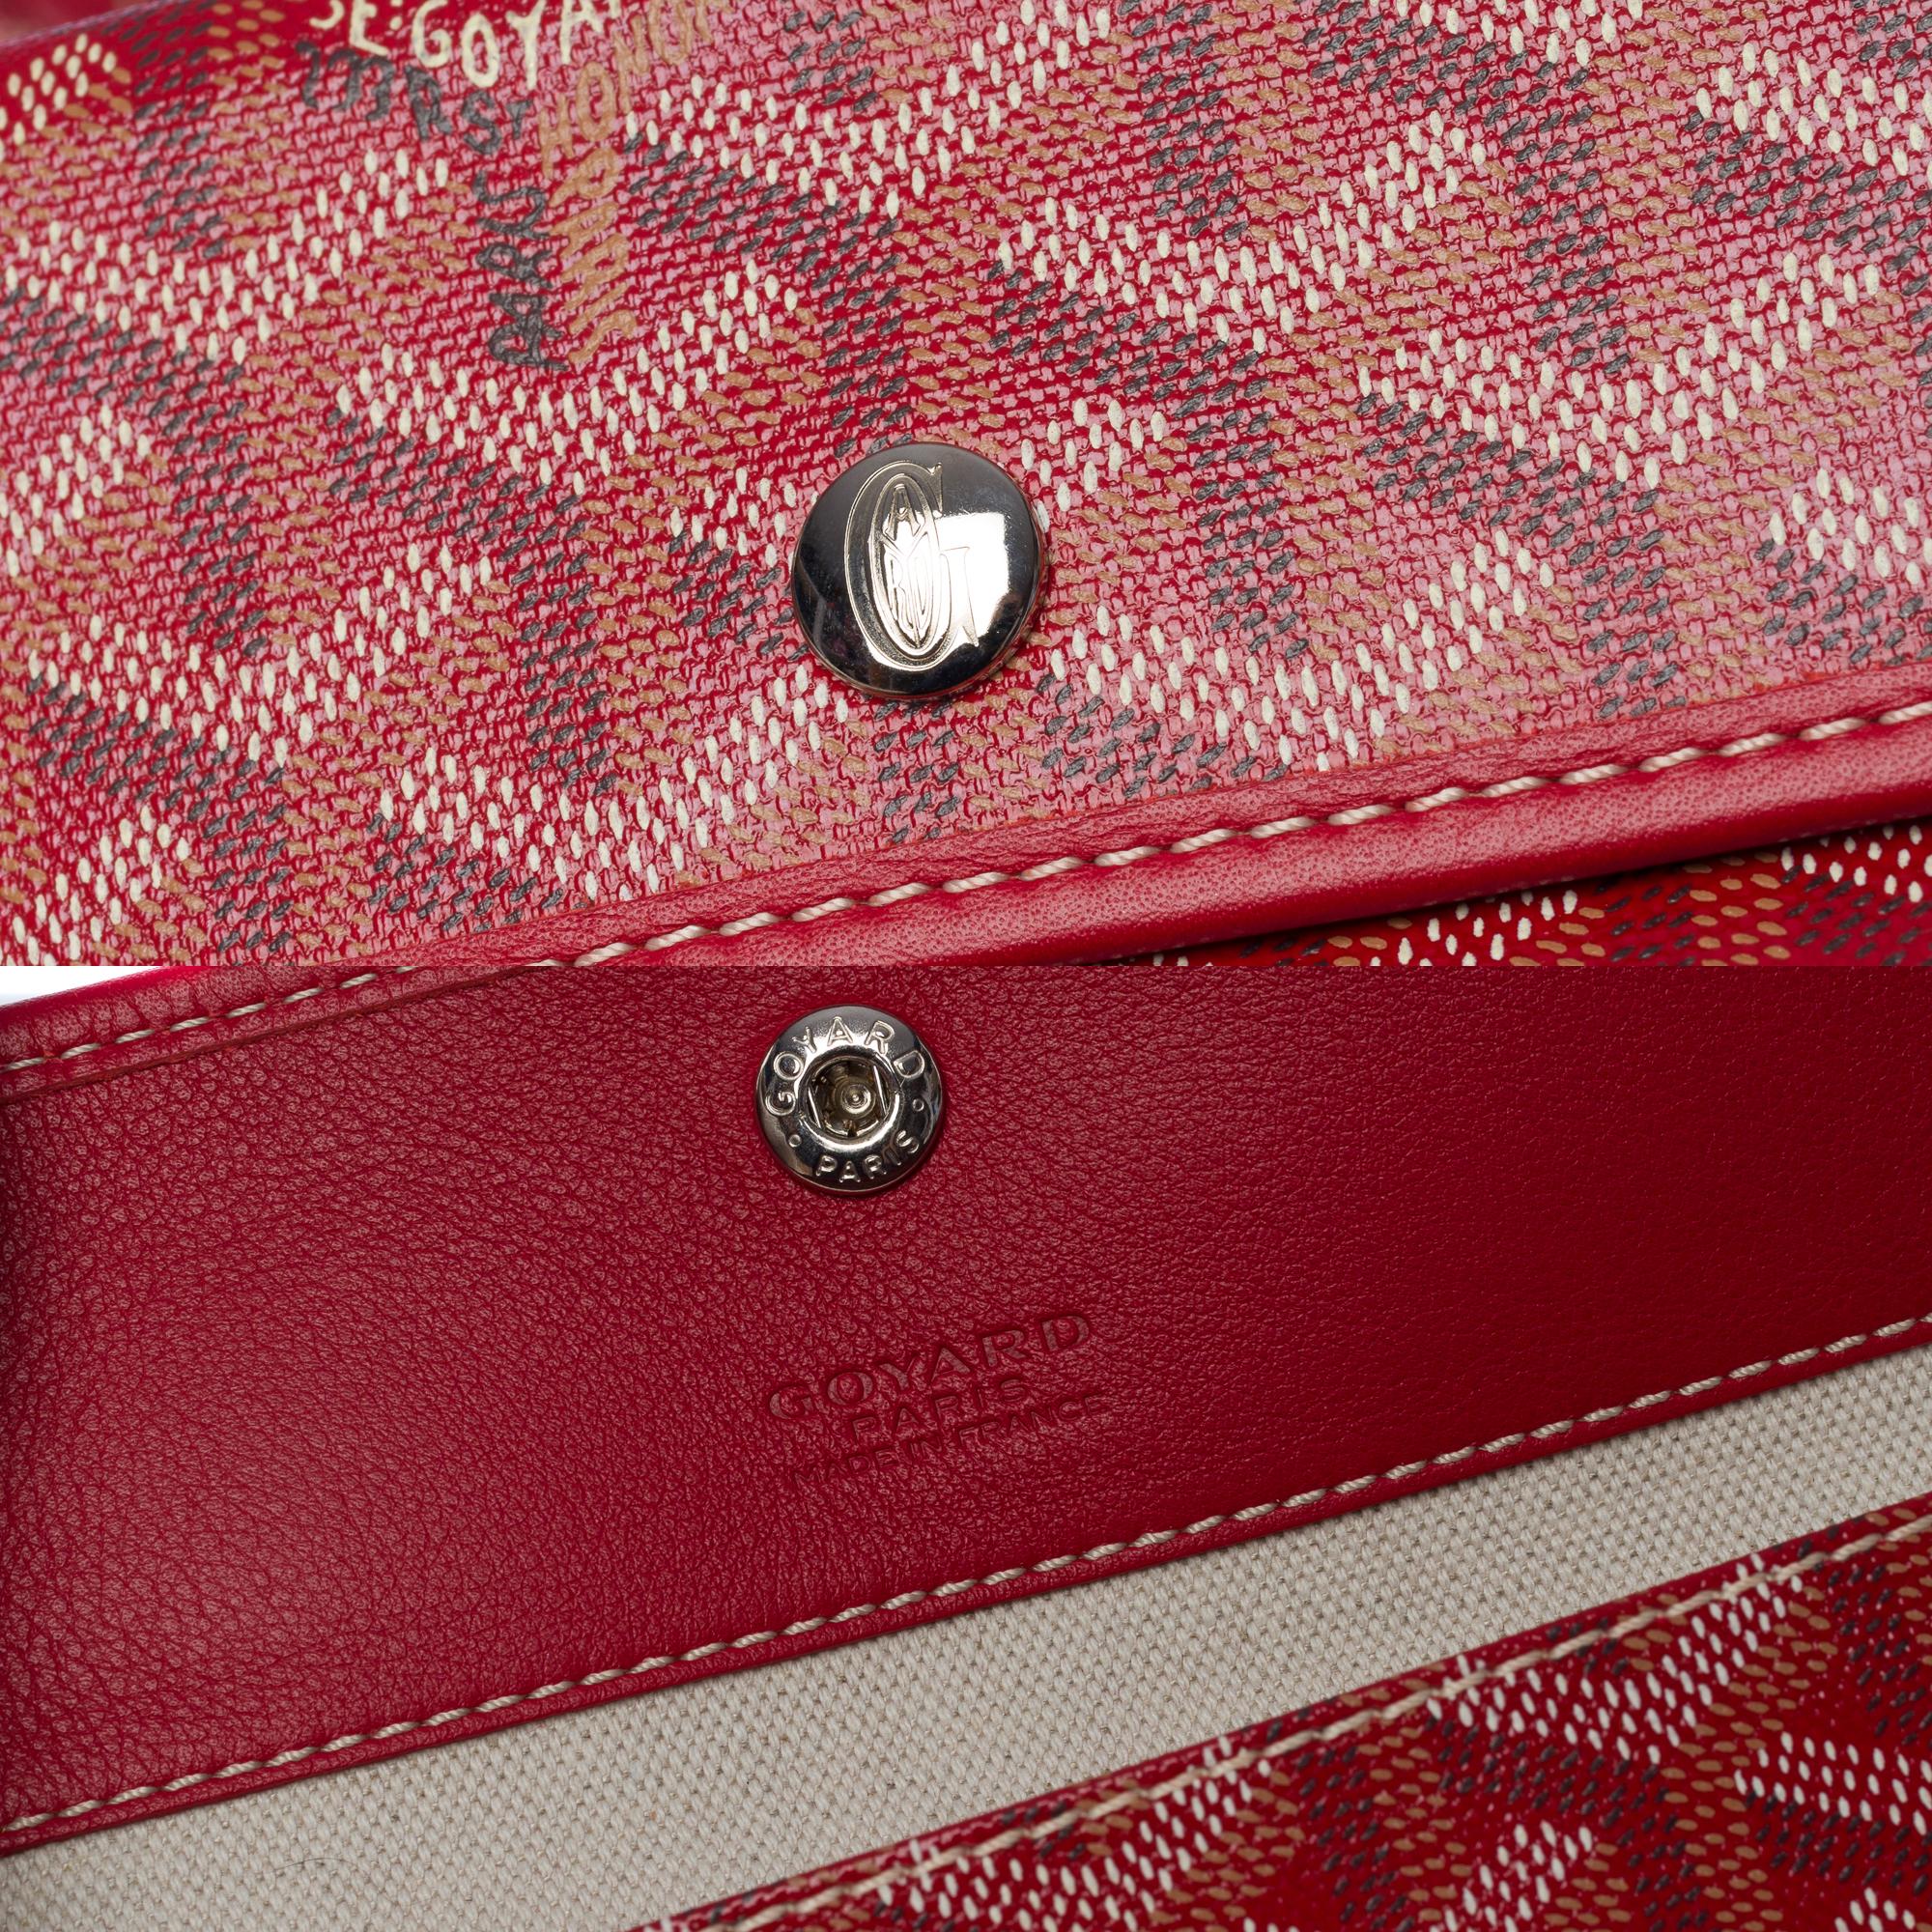 The Coveted Goyard Saint-Louis PM Tote bag in Red canvas and leather, SHW 1